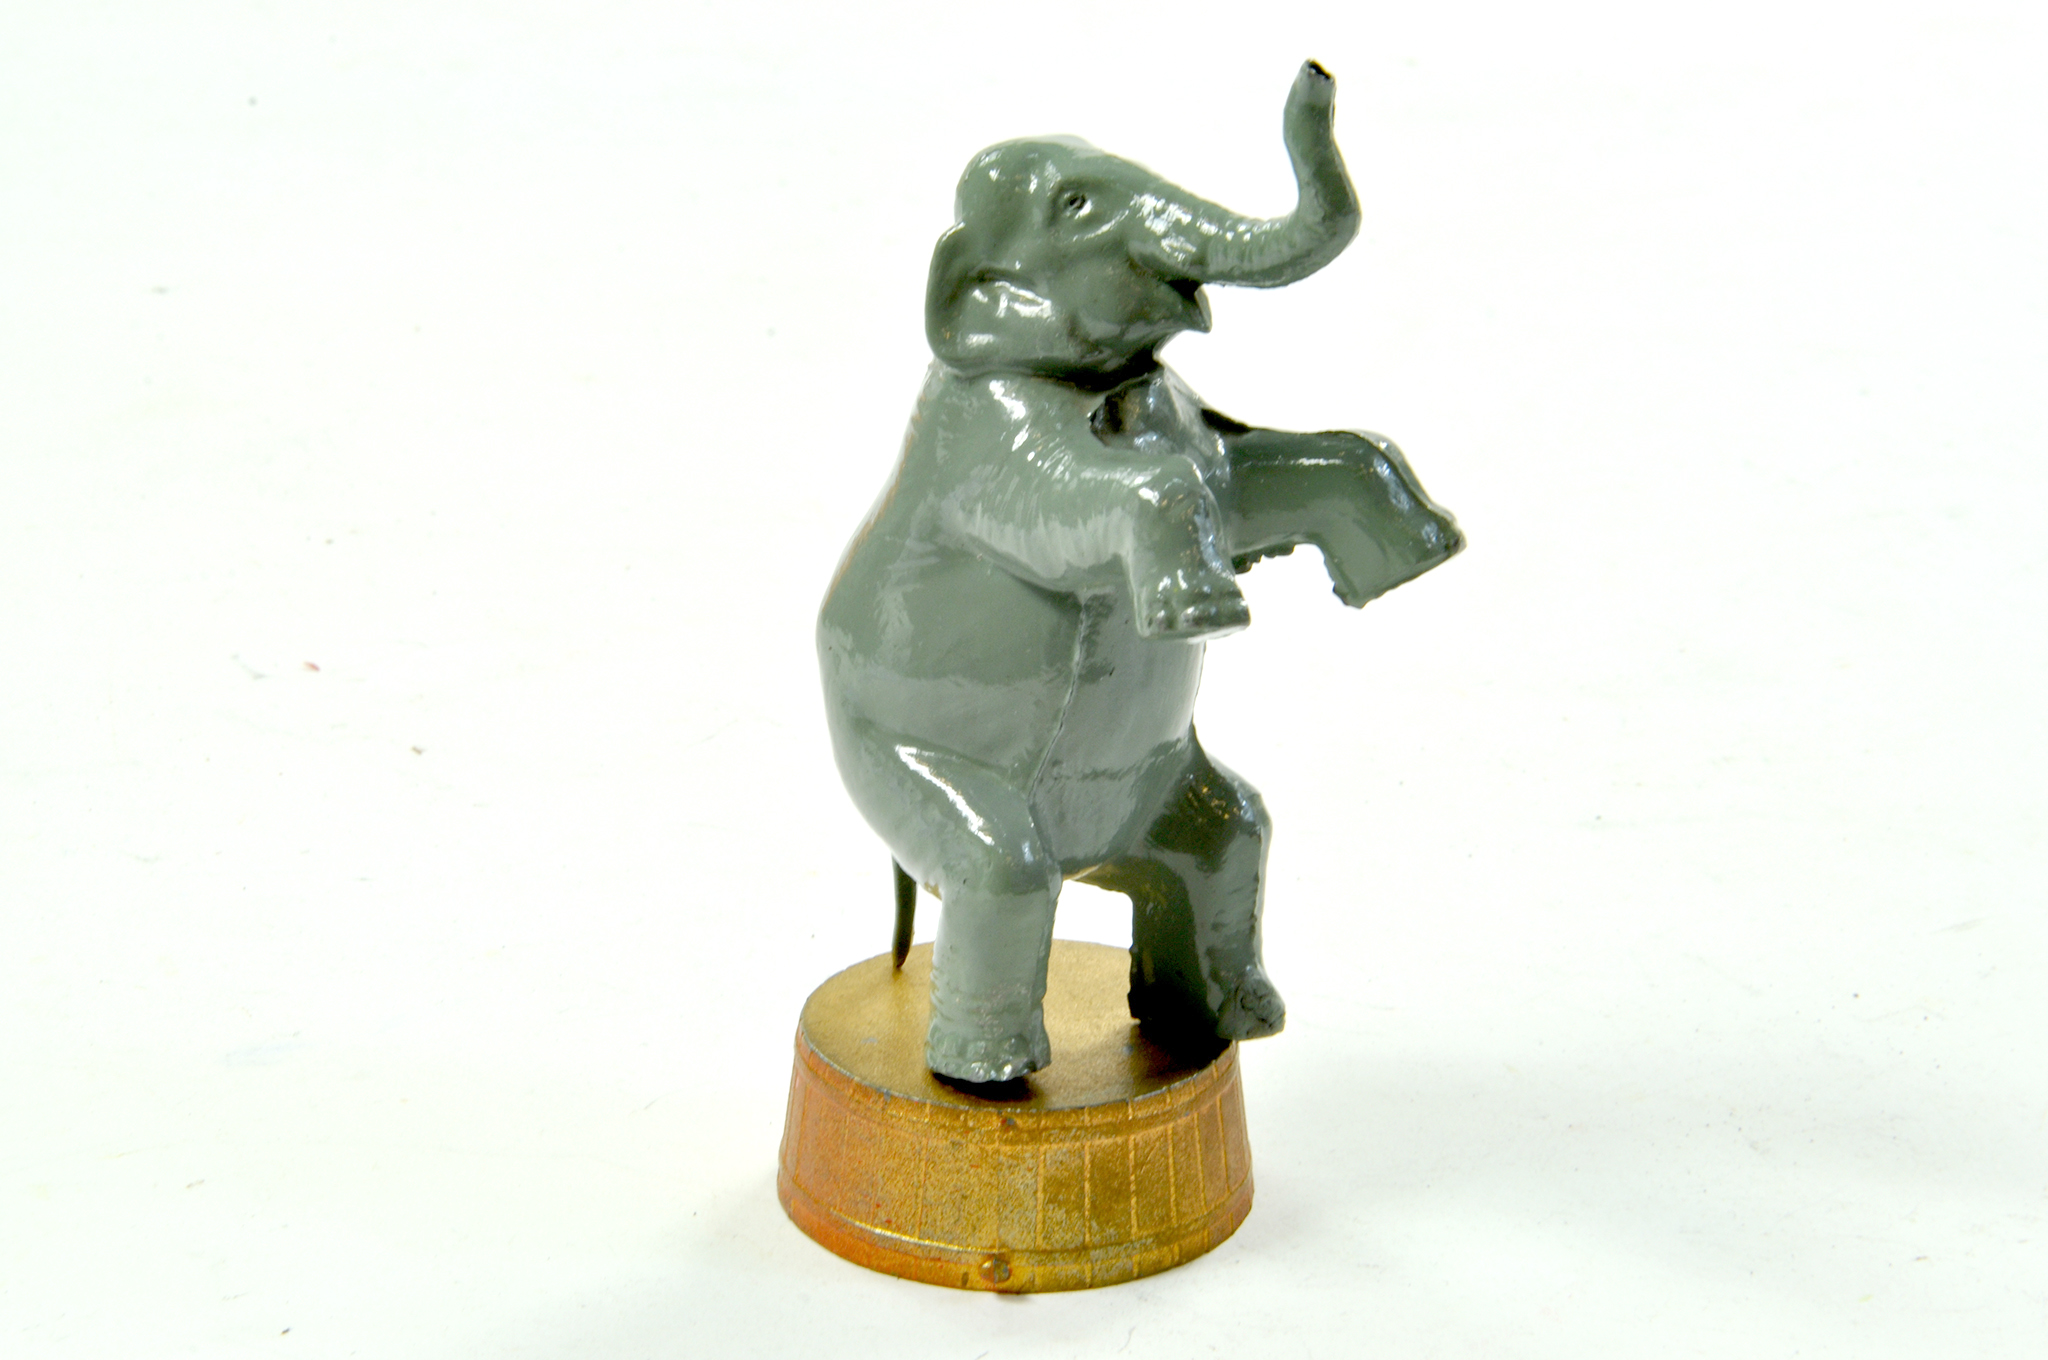 Britains Circus Elephant on Barrel. Generally excellent example, little or no paint wear. Little